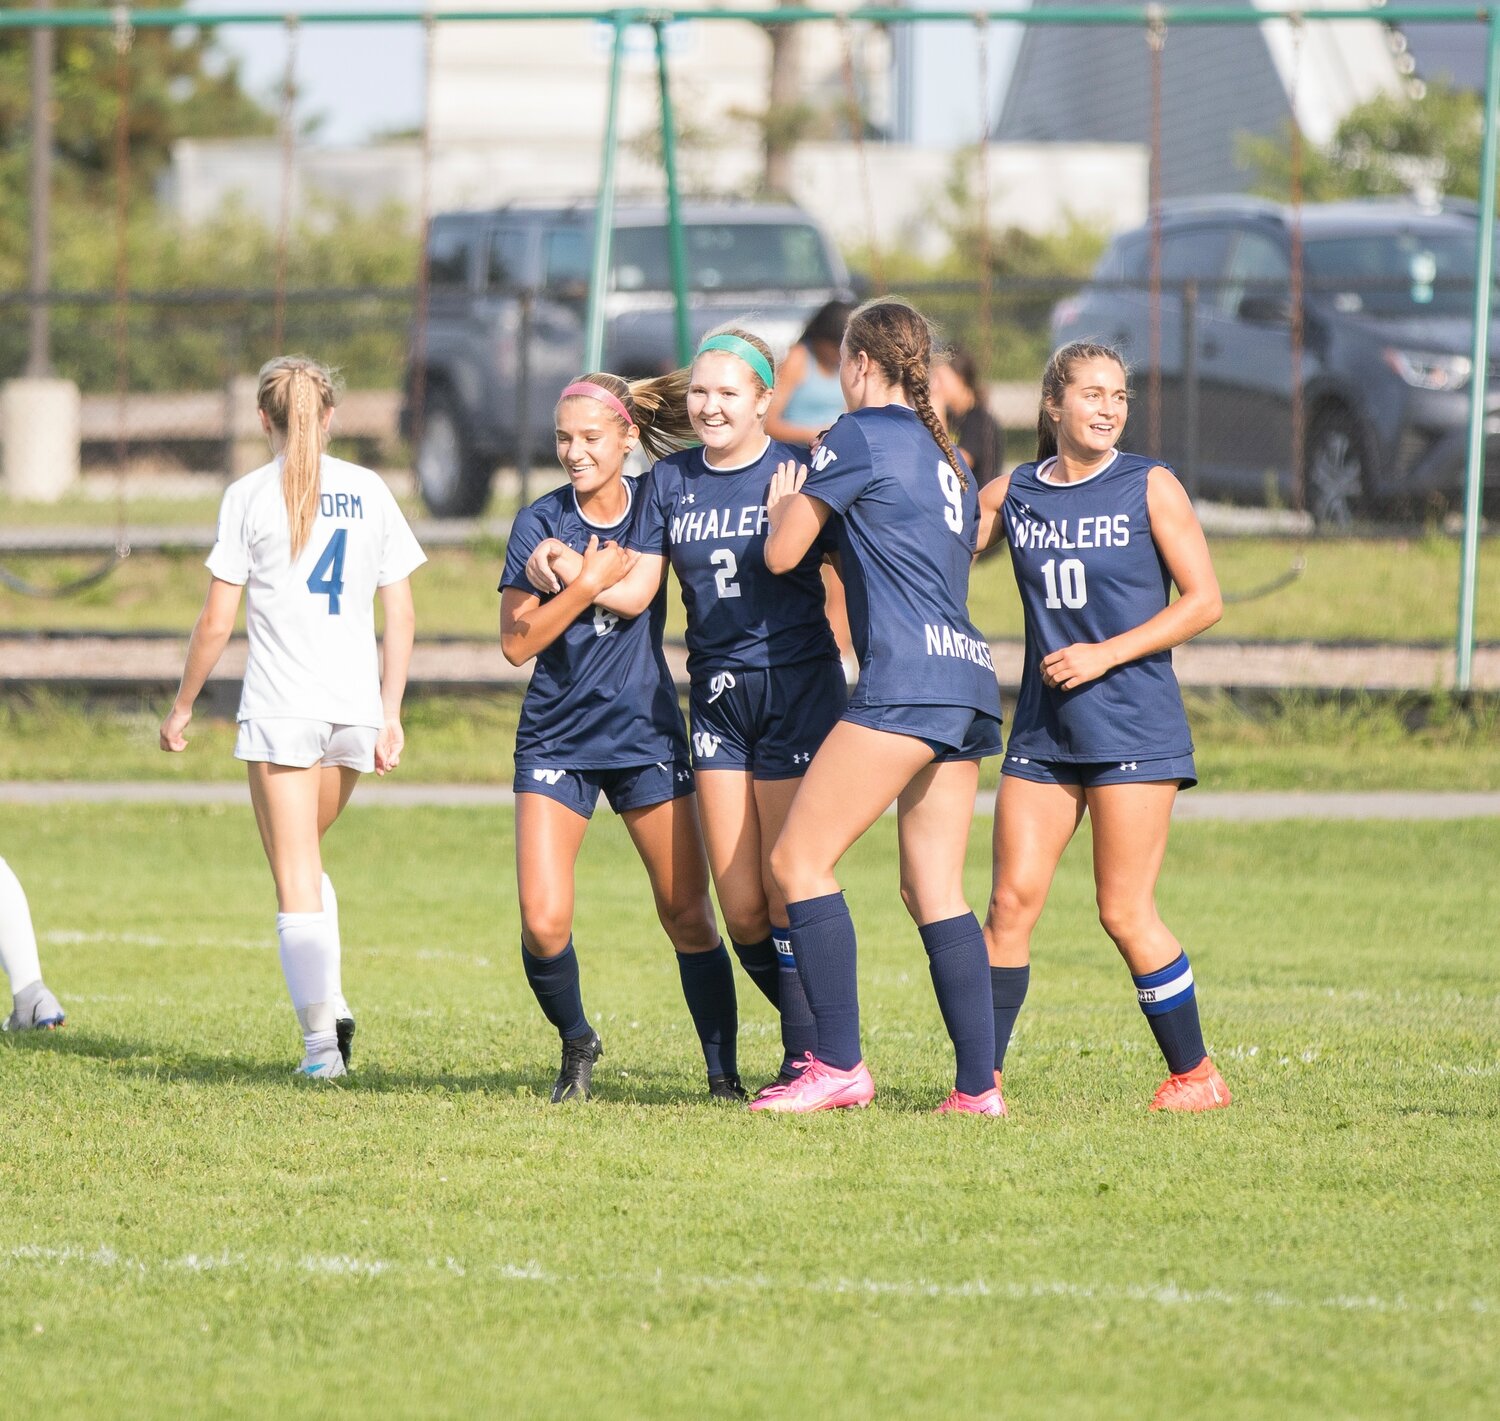 From left, Gabby Nikolova, Chelsea Gross, Myah Johnson and Claire Misurelli celebrate after a goal.